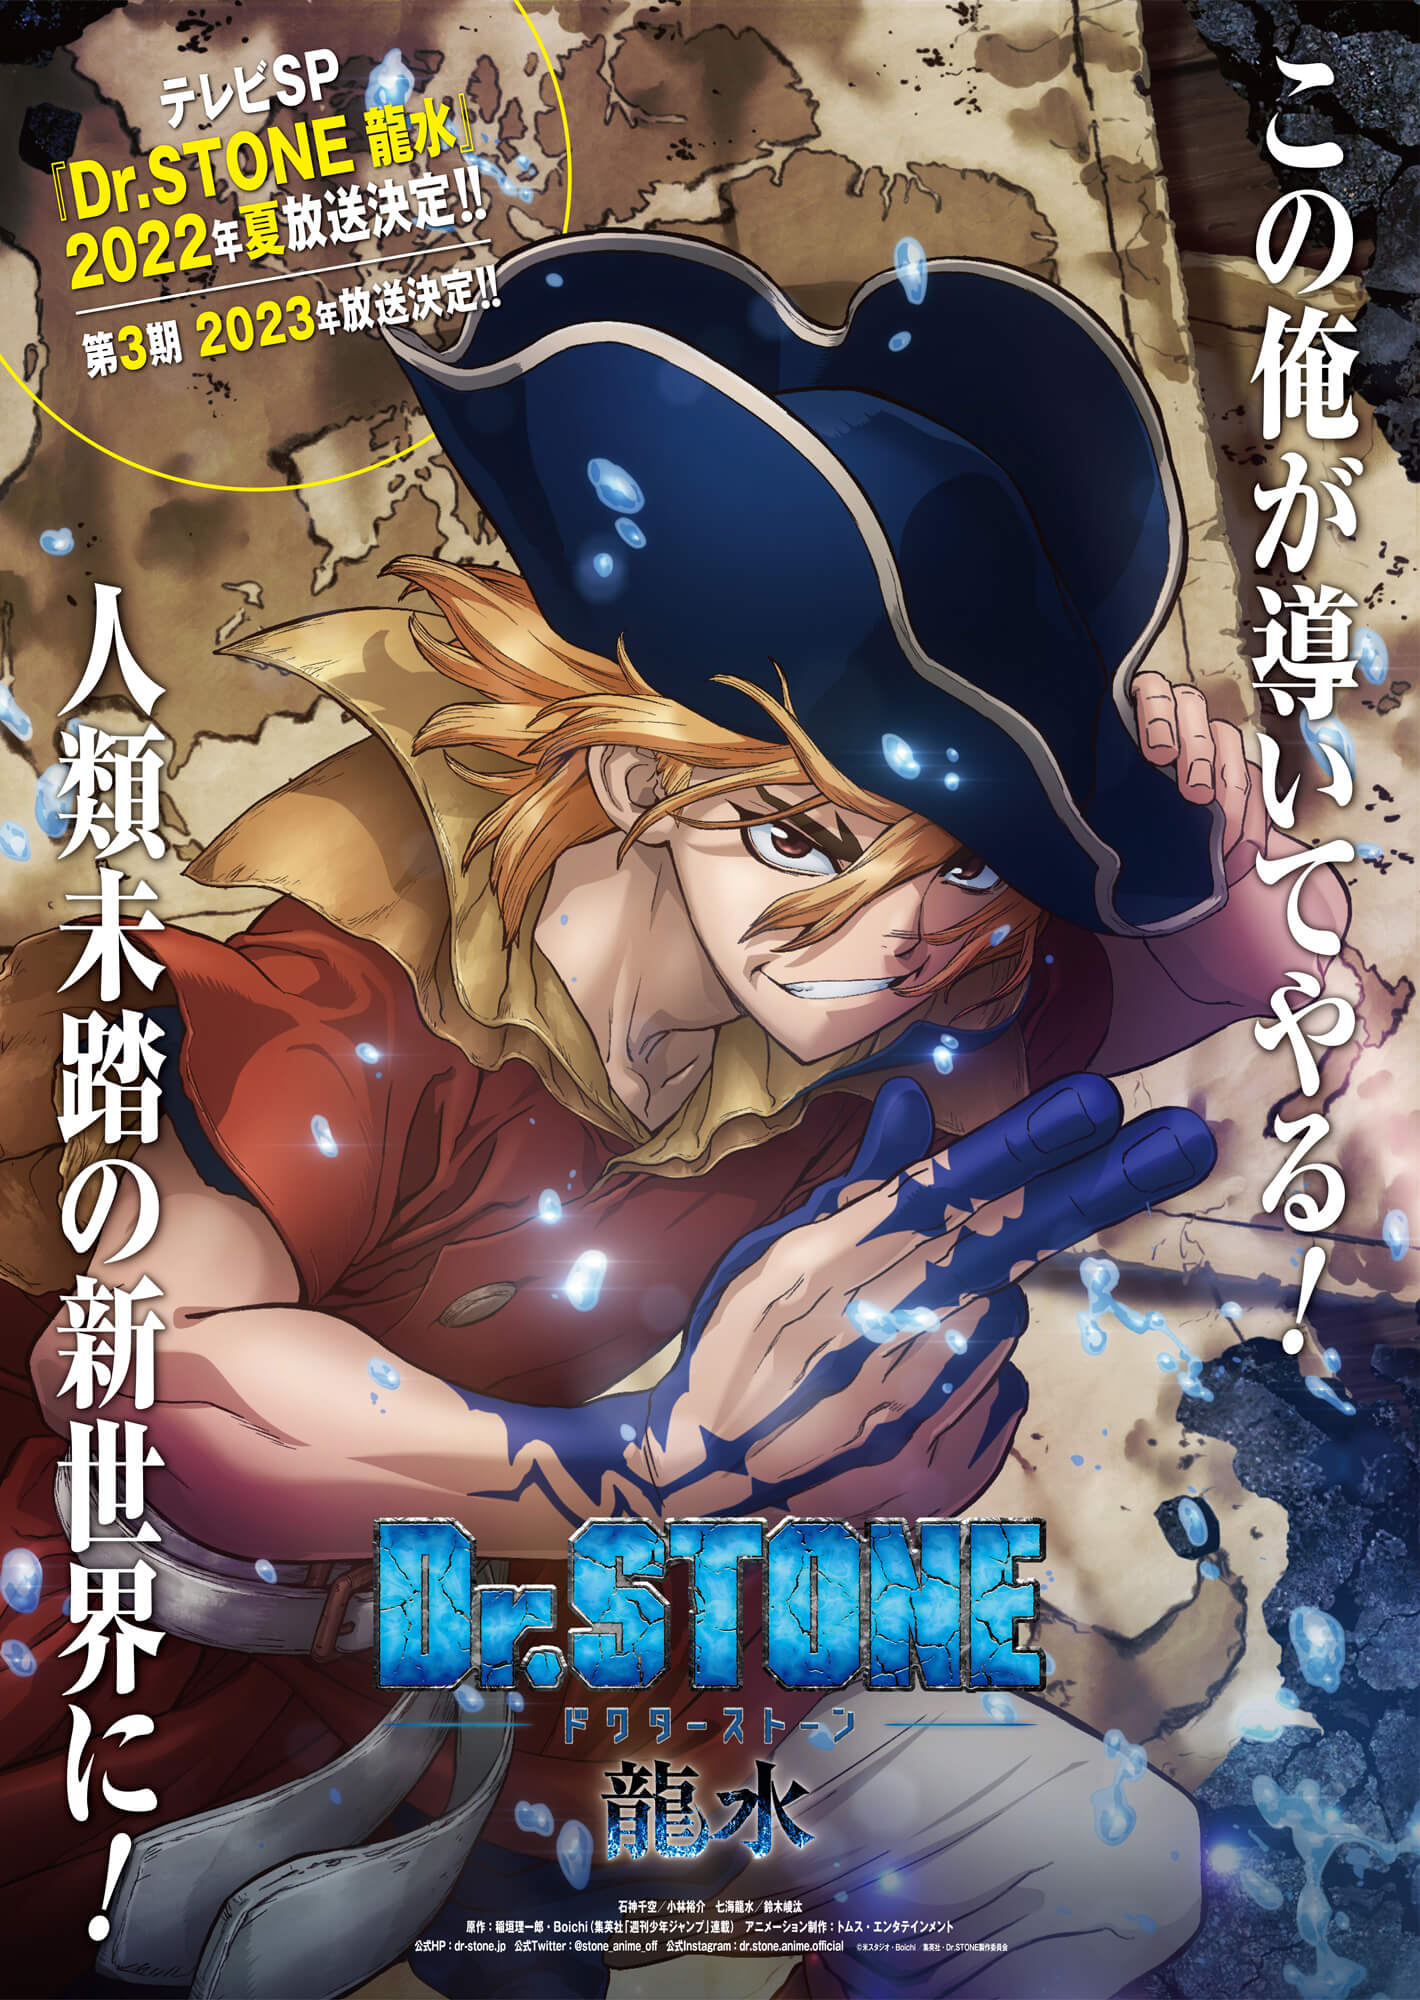 Dr. Stone New World season 3 part 2 reveals new trailer and